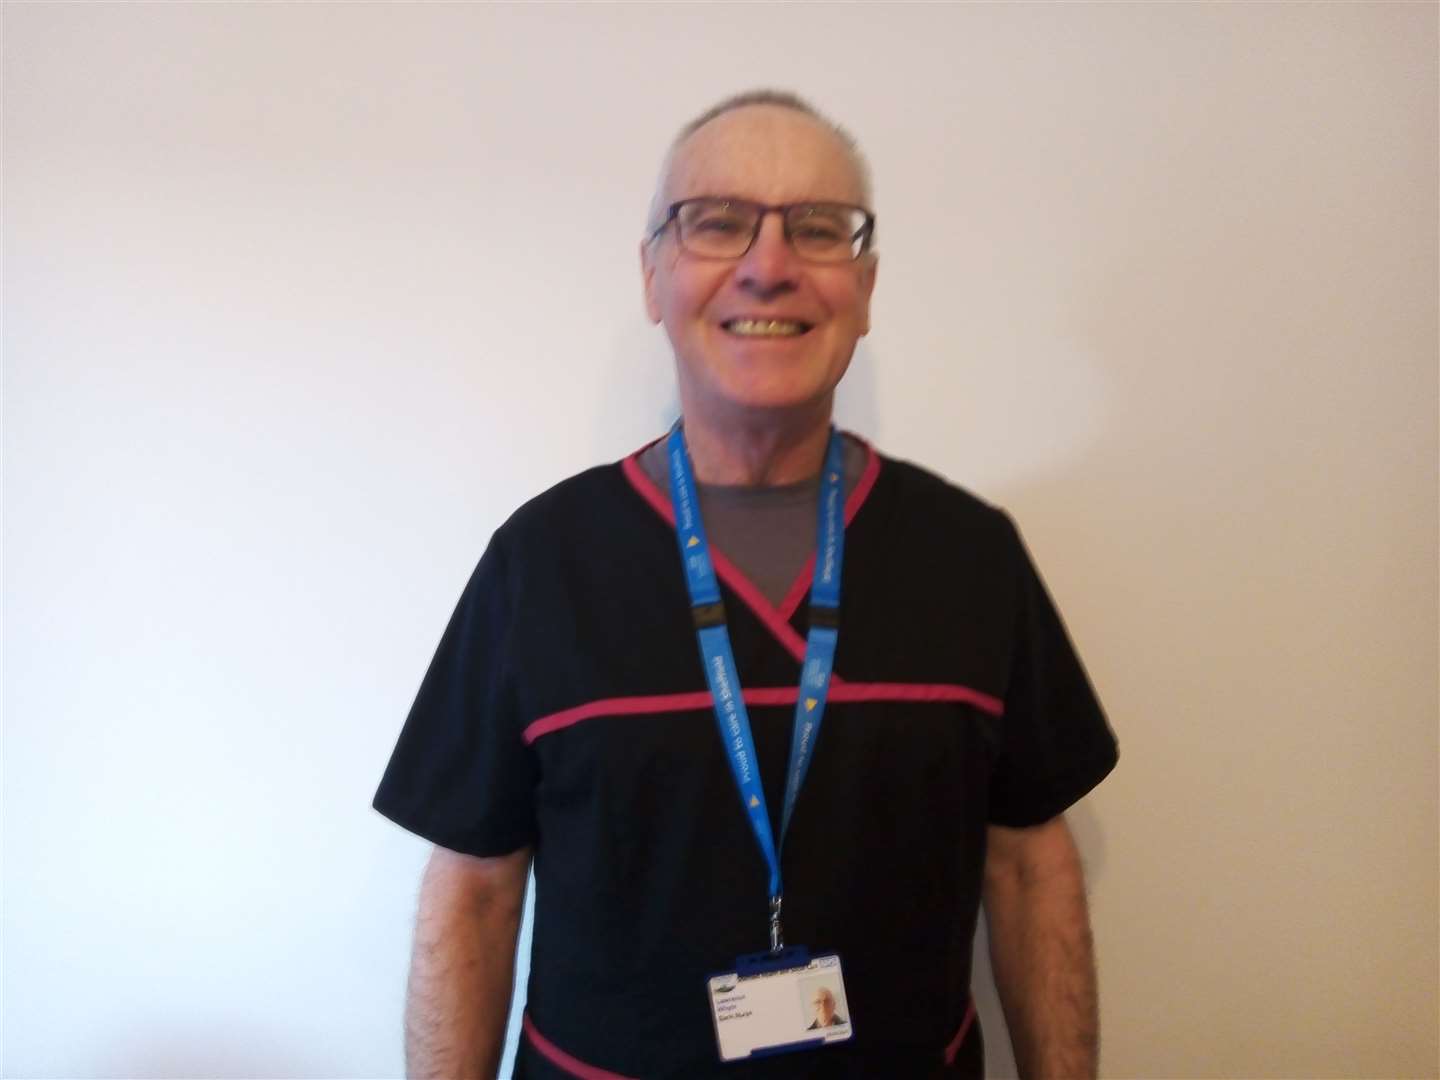 Laurence Whyte began his nursing career at St Augustine's hospital more than 50 years ago